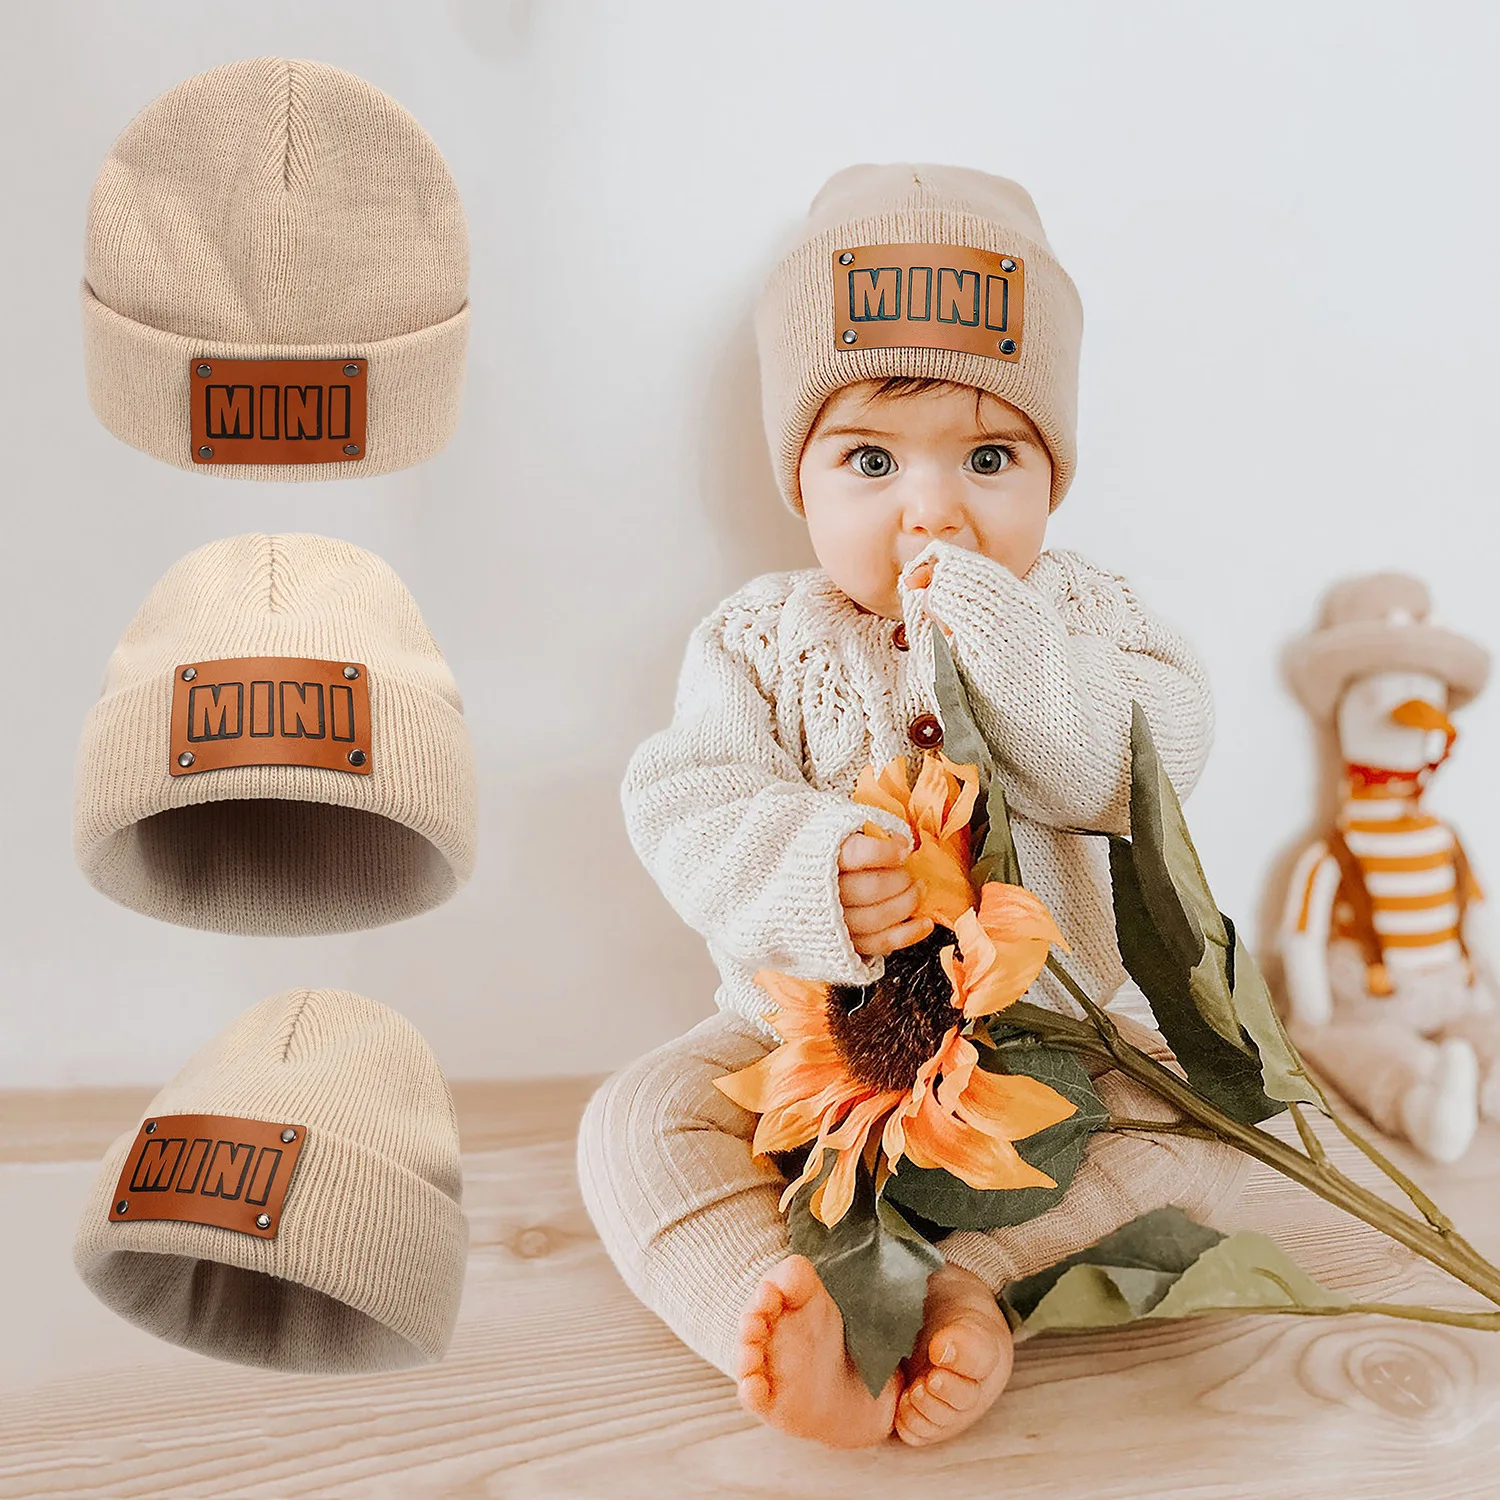 

Baby Hat Knitted Boys Girls Autumn Winter Warm Beanie Kids Adult Parent-Child Hats Newborn Cap with MINI and MAMA Leather Label